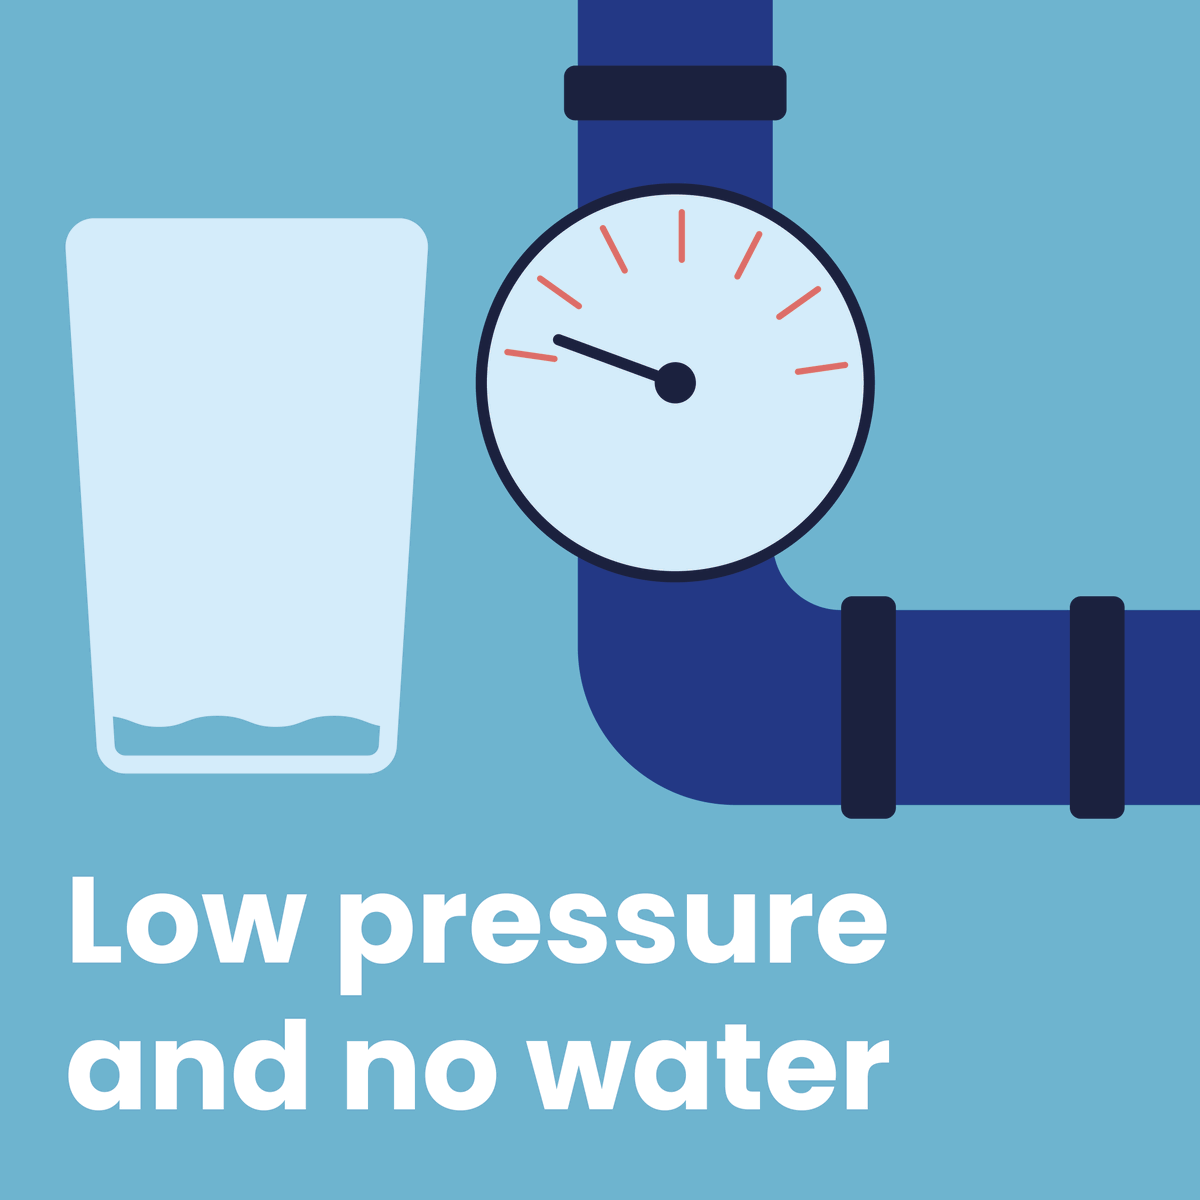 ⚠️ #StOswaldRoad #WF2  

We’re sorry customers in WF2 may have low pressure or no water due to a burst pipe. We're doing everything we can to get this fixed as soon as possible. We appreciate your patience & we'll keep you updated on our progress. - Jo.